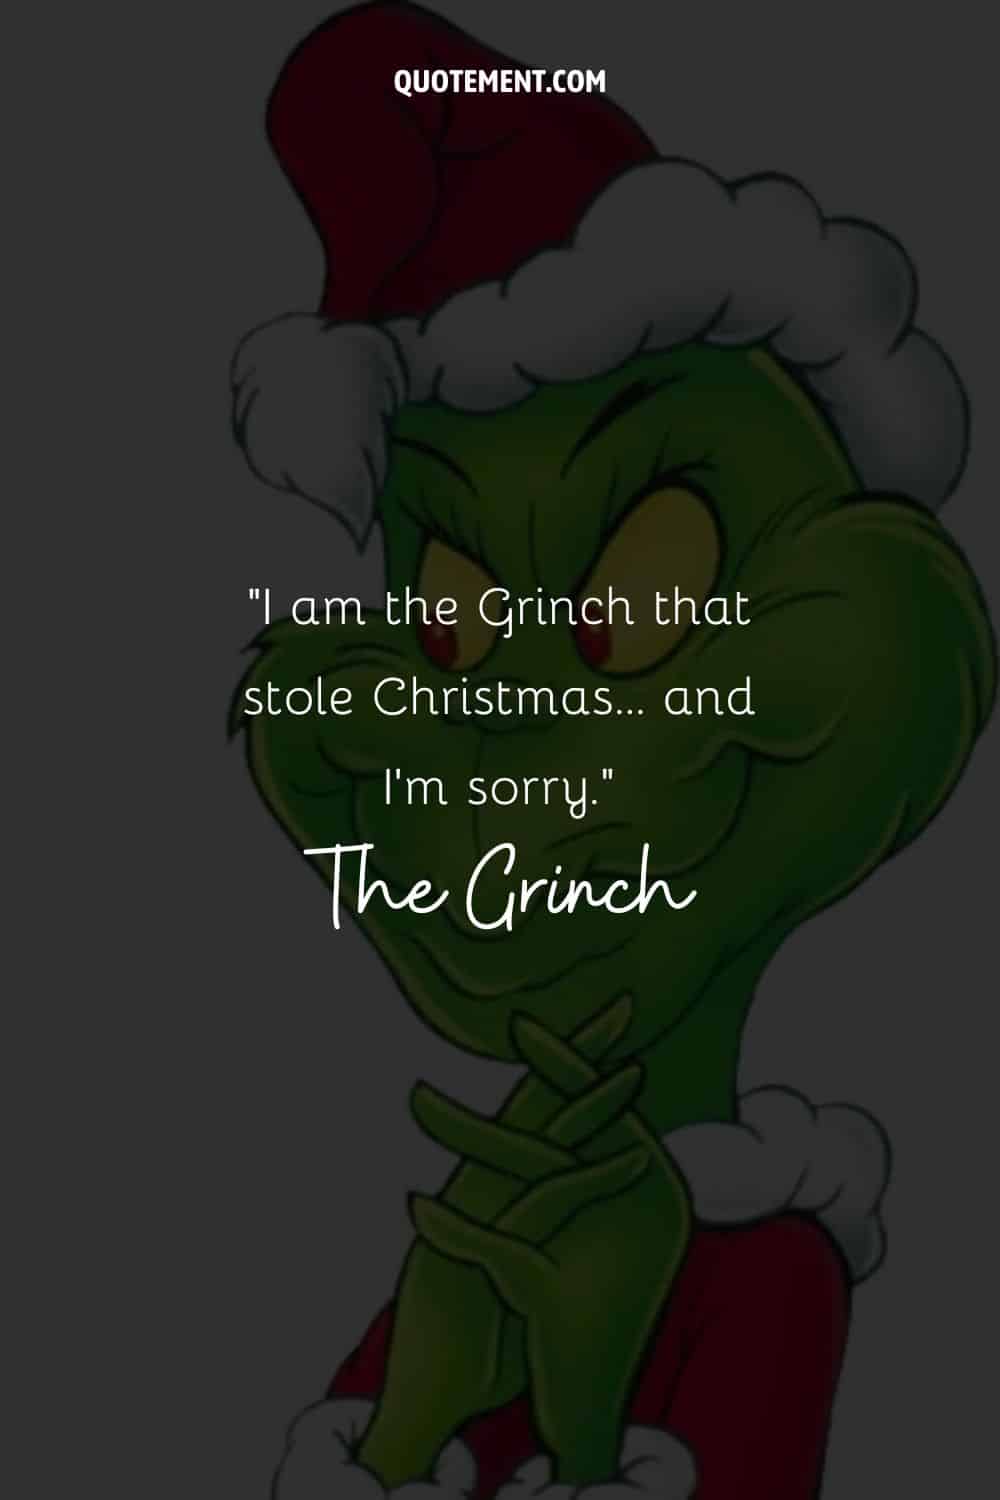 I am the Grinch that stole Christmas... and I'm sorry